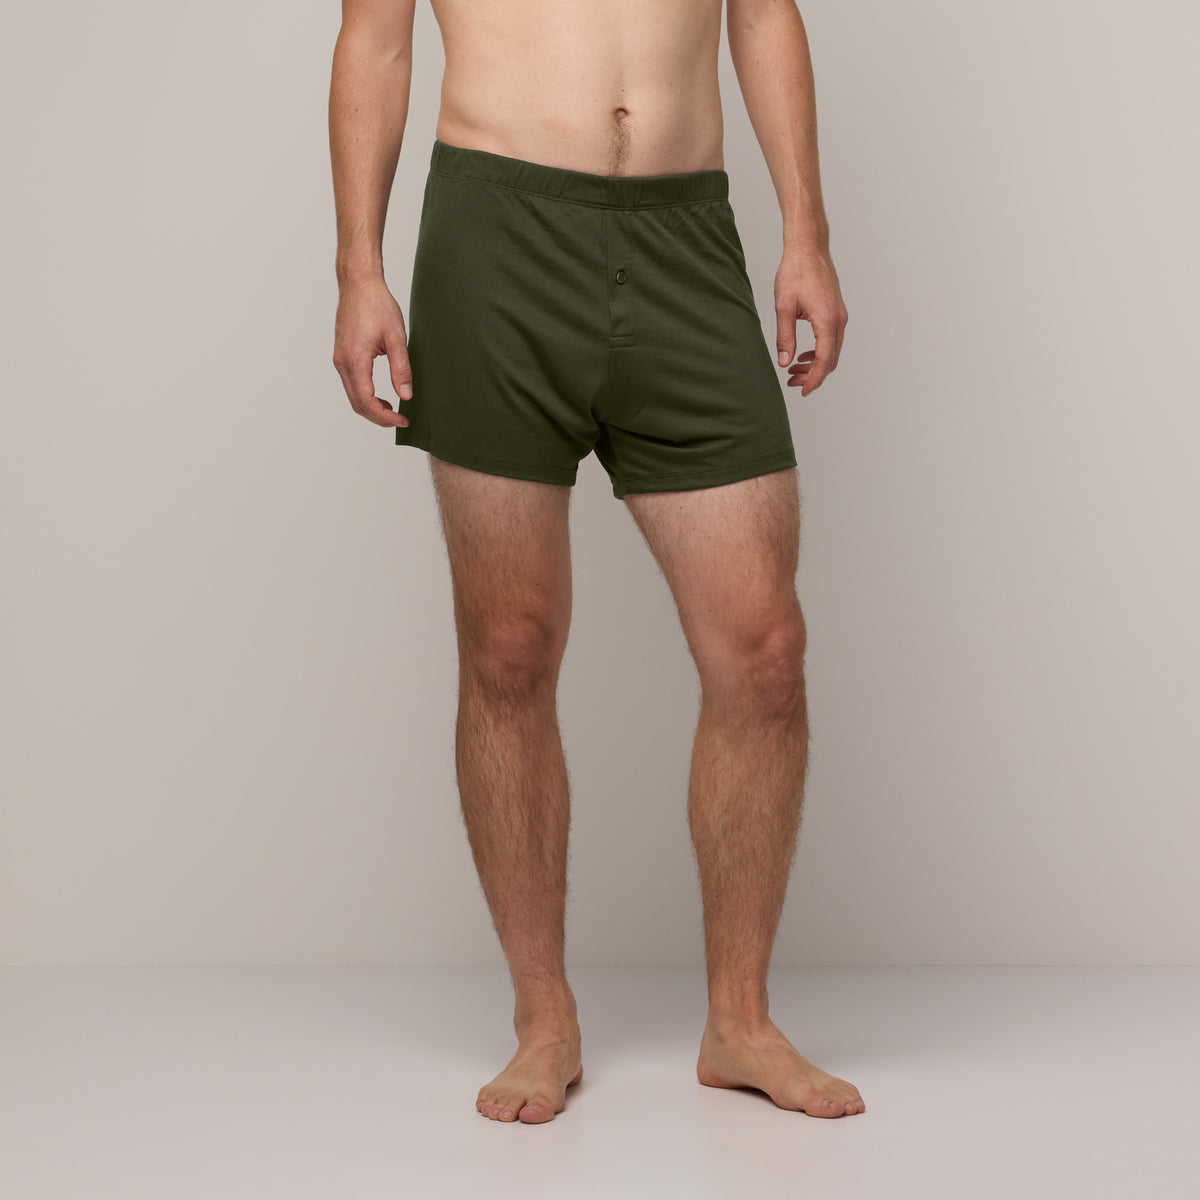 image-on-hover,model-spec:Mark is 6'3", 185lbs, and wears a size L